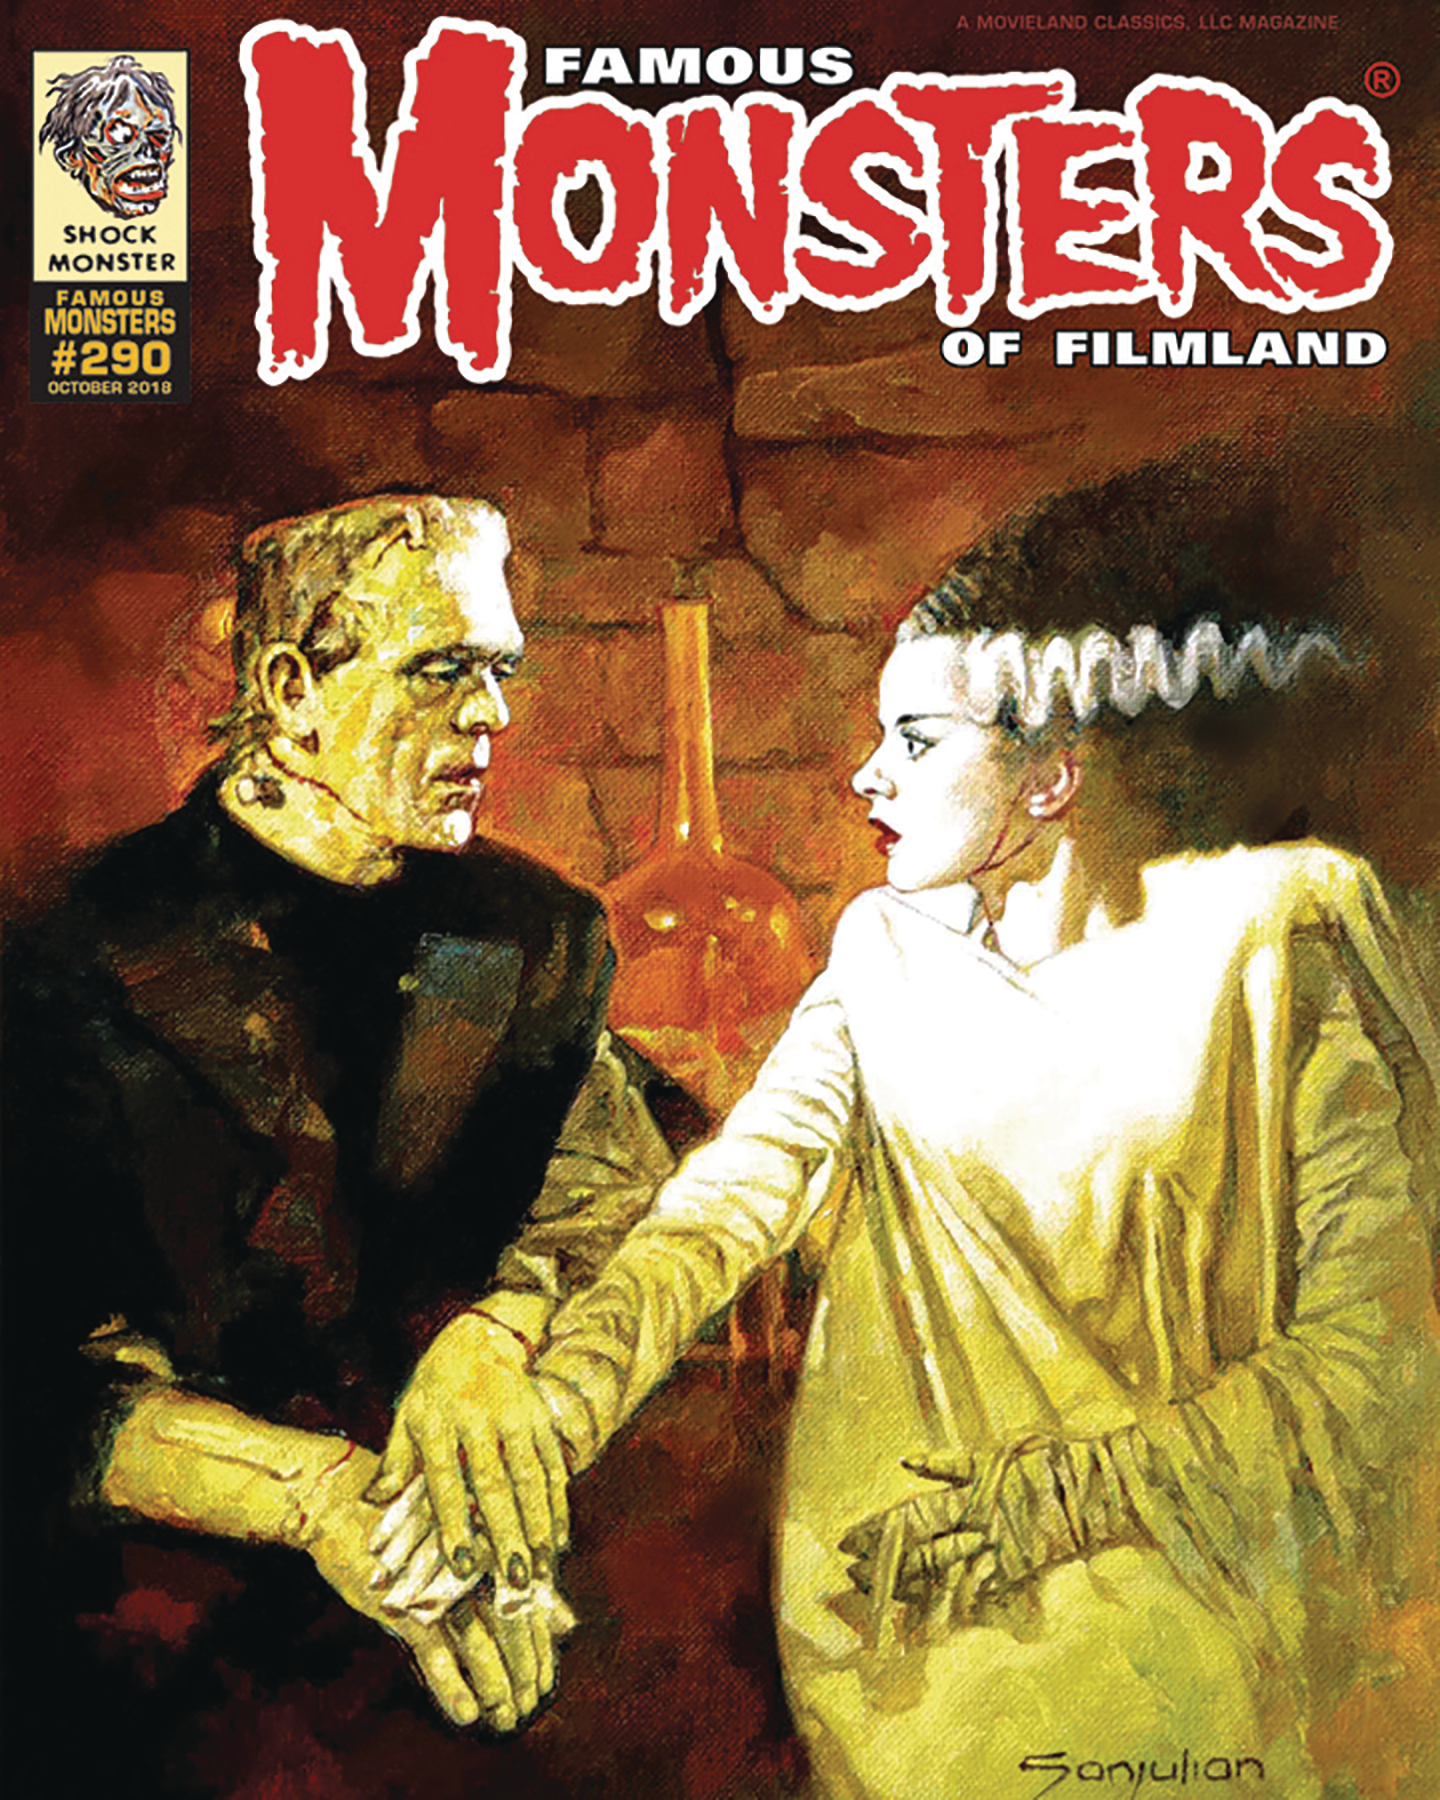 FAMOUS MONSTERS OF FILMLAND #290 2018 ANNUAL